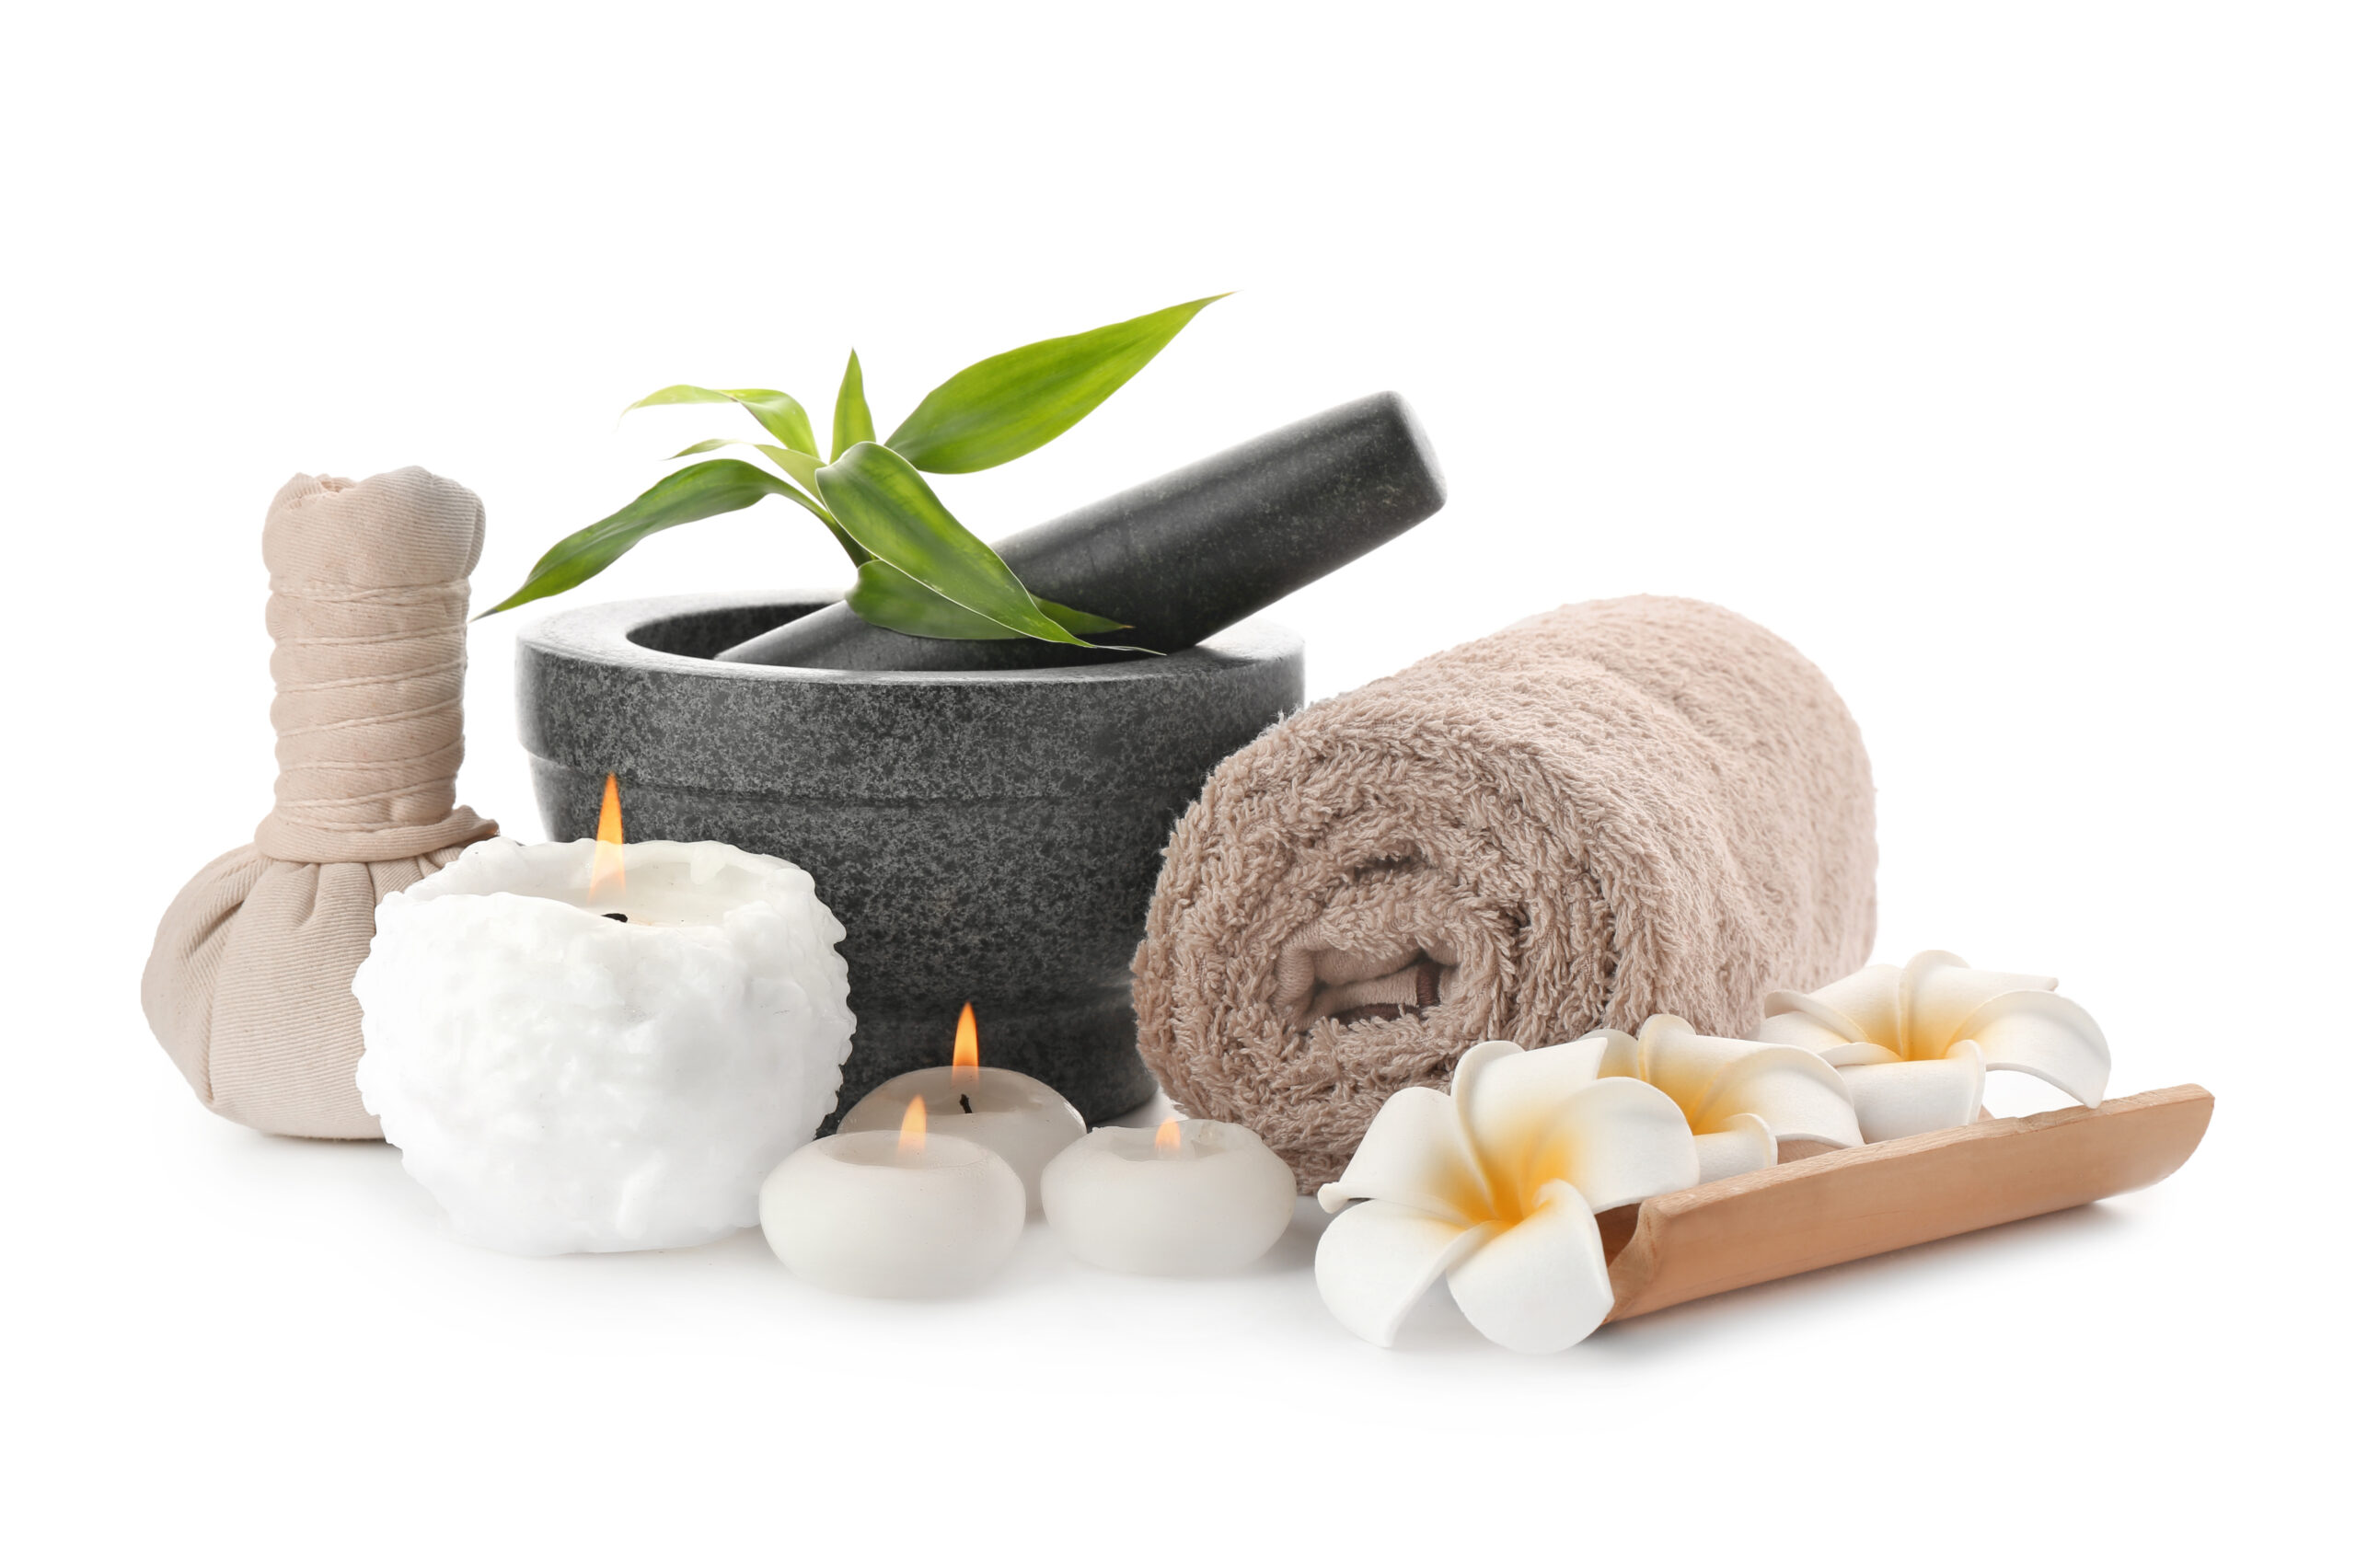 Spa composition with mortar, candles and clean towel on white background